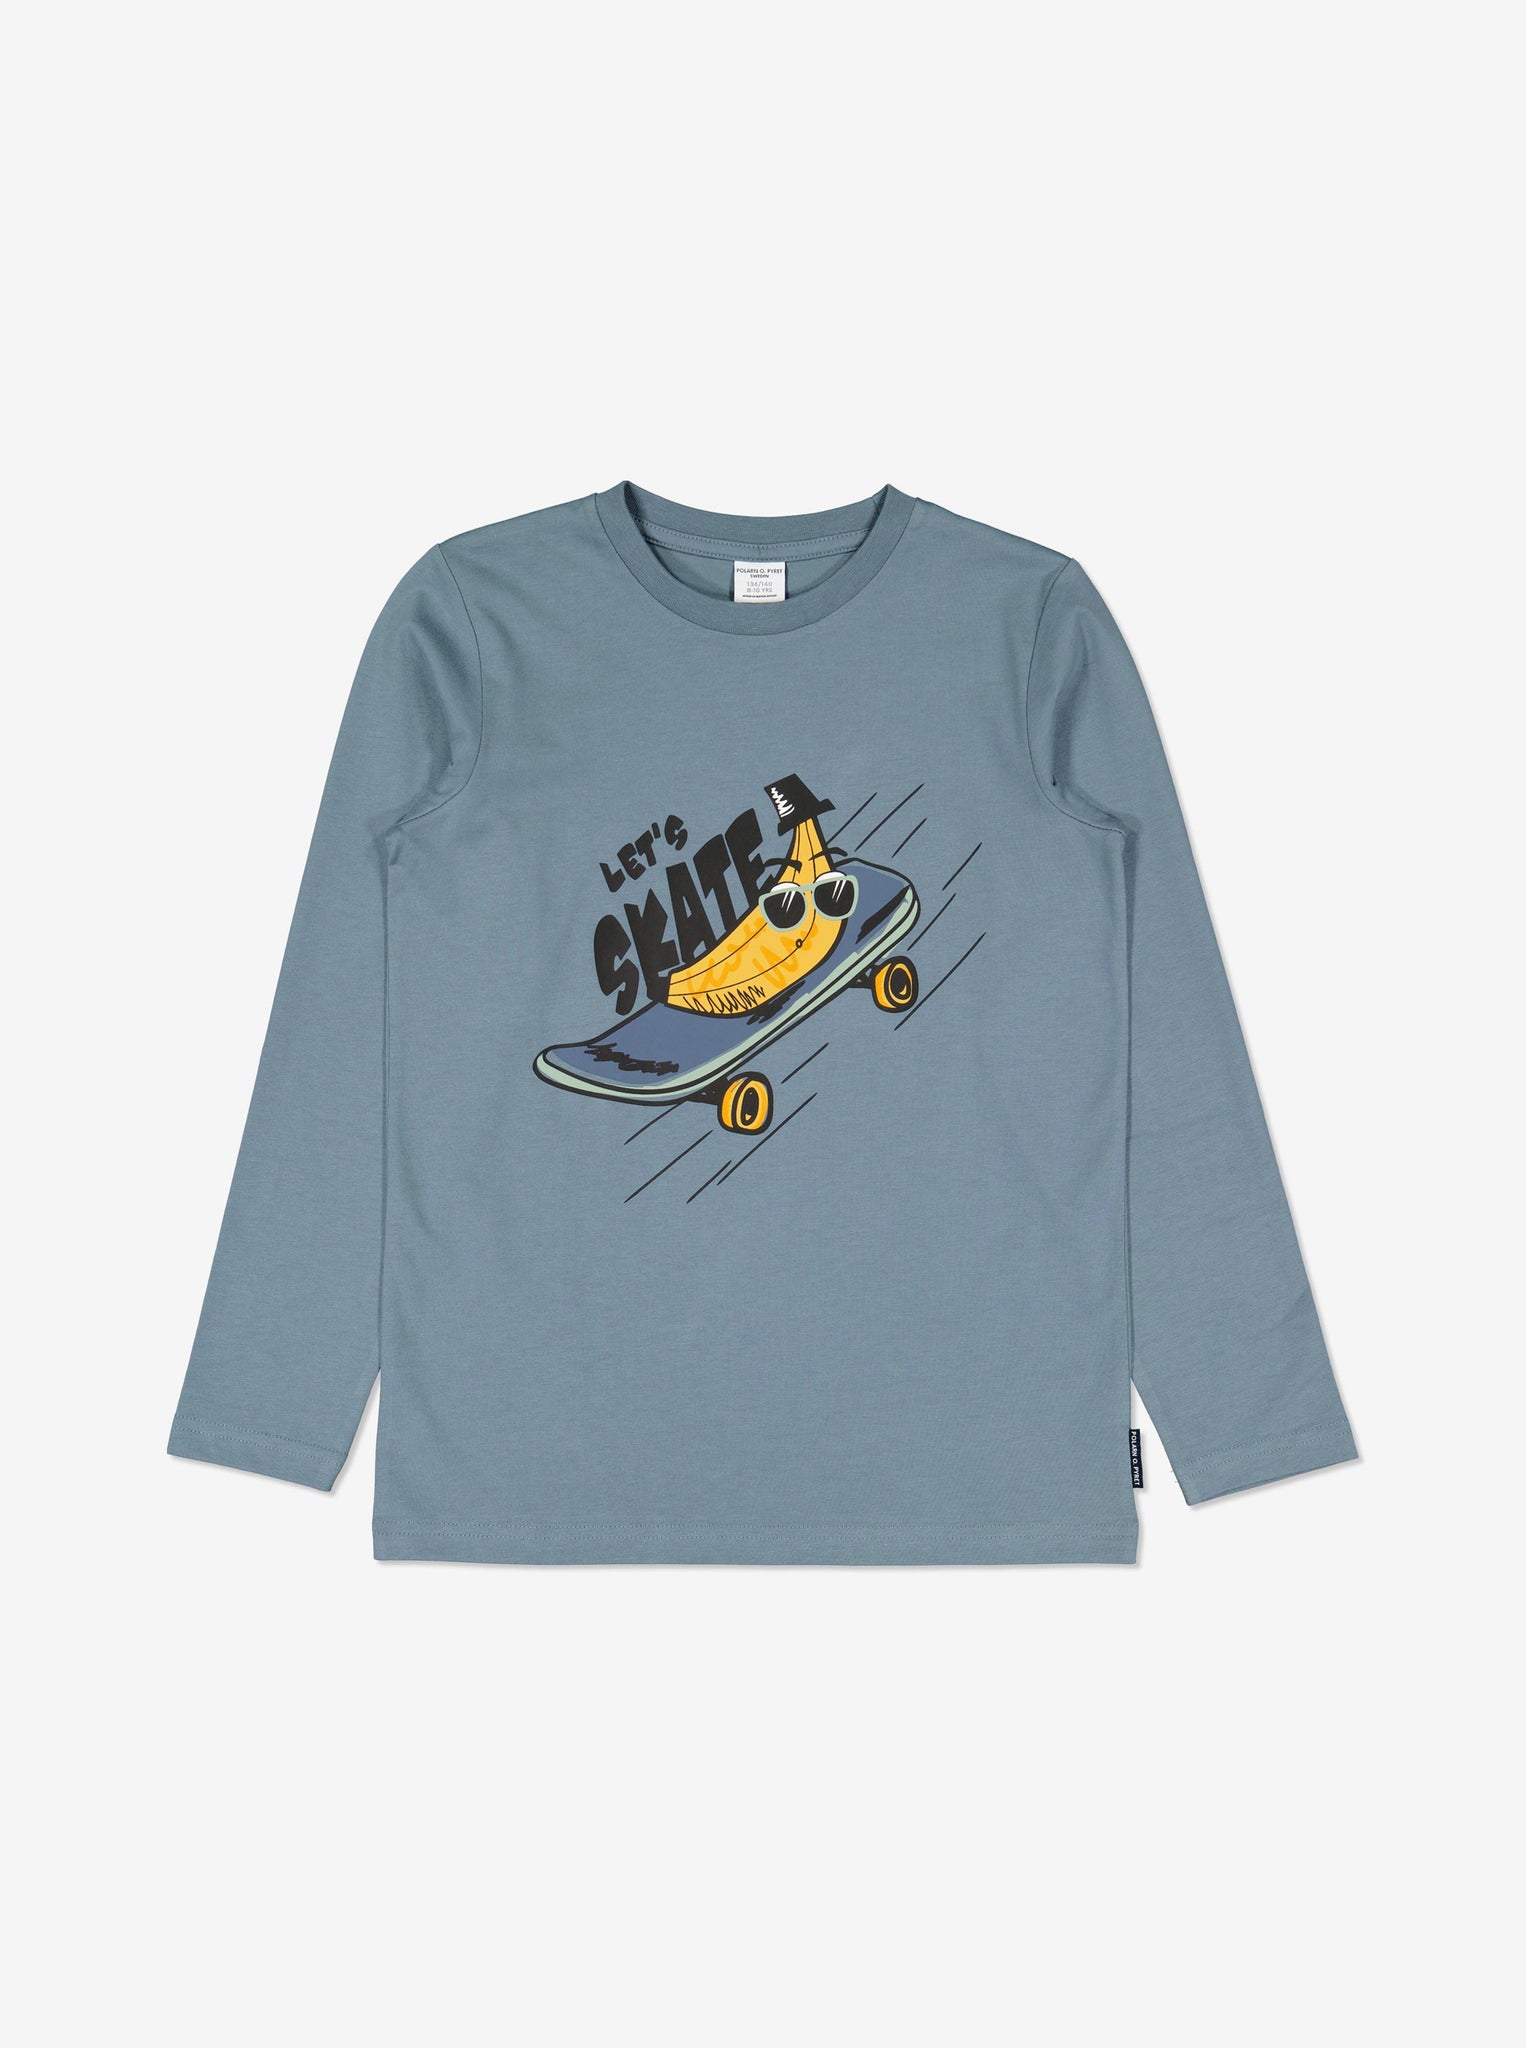  Organic Cotton Blue Boys Top from Polarn O. Pyret Kidswear. Made with 100% organic cotton.